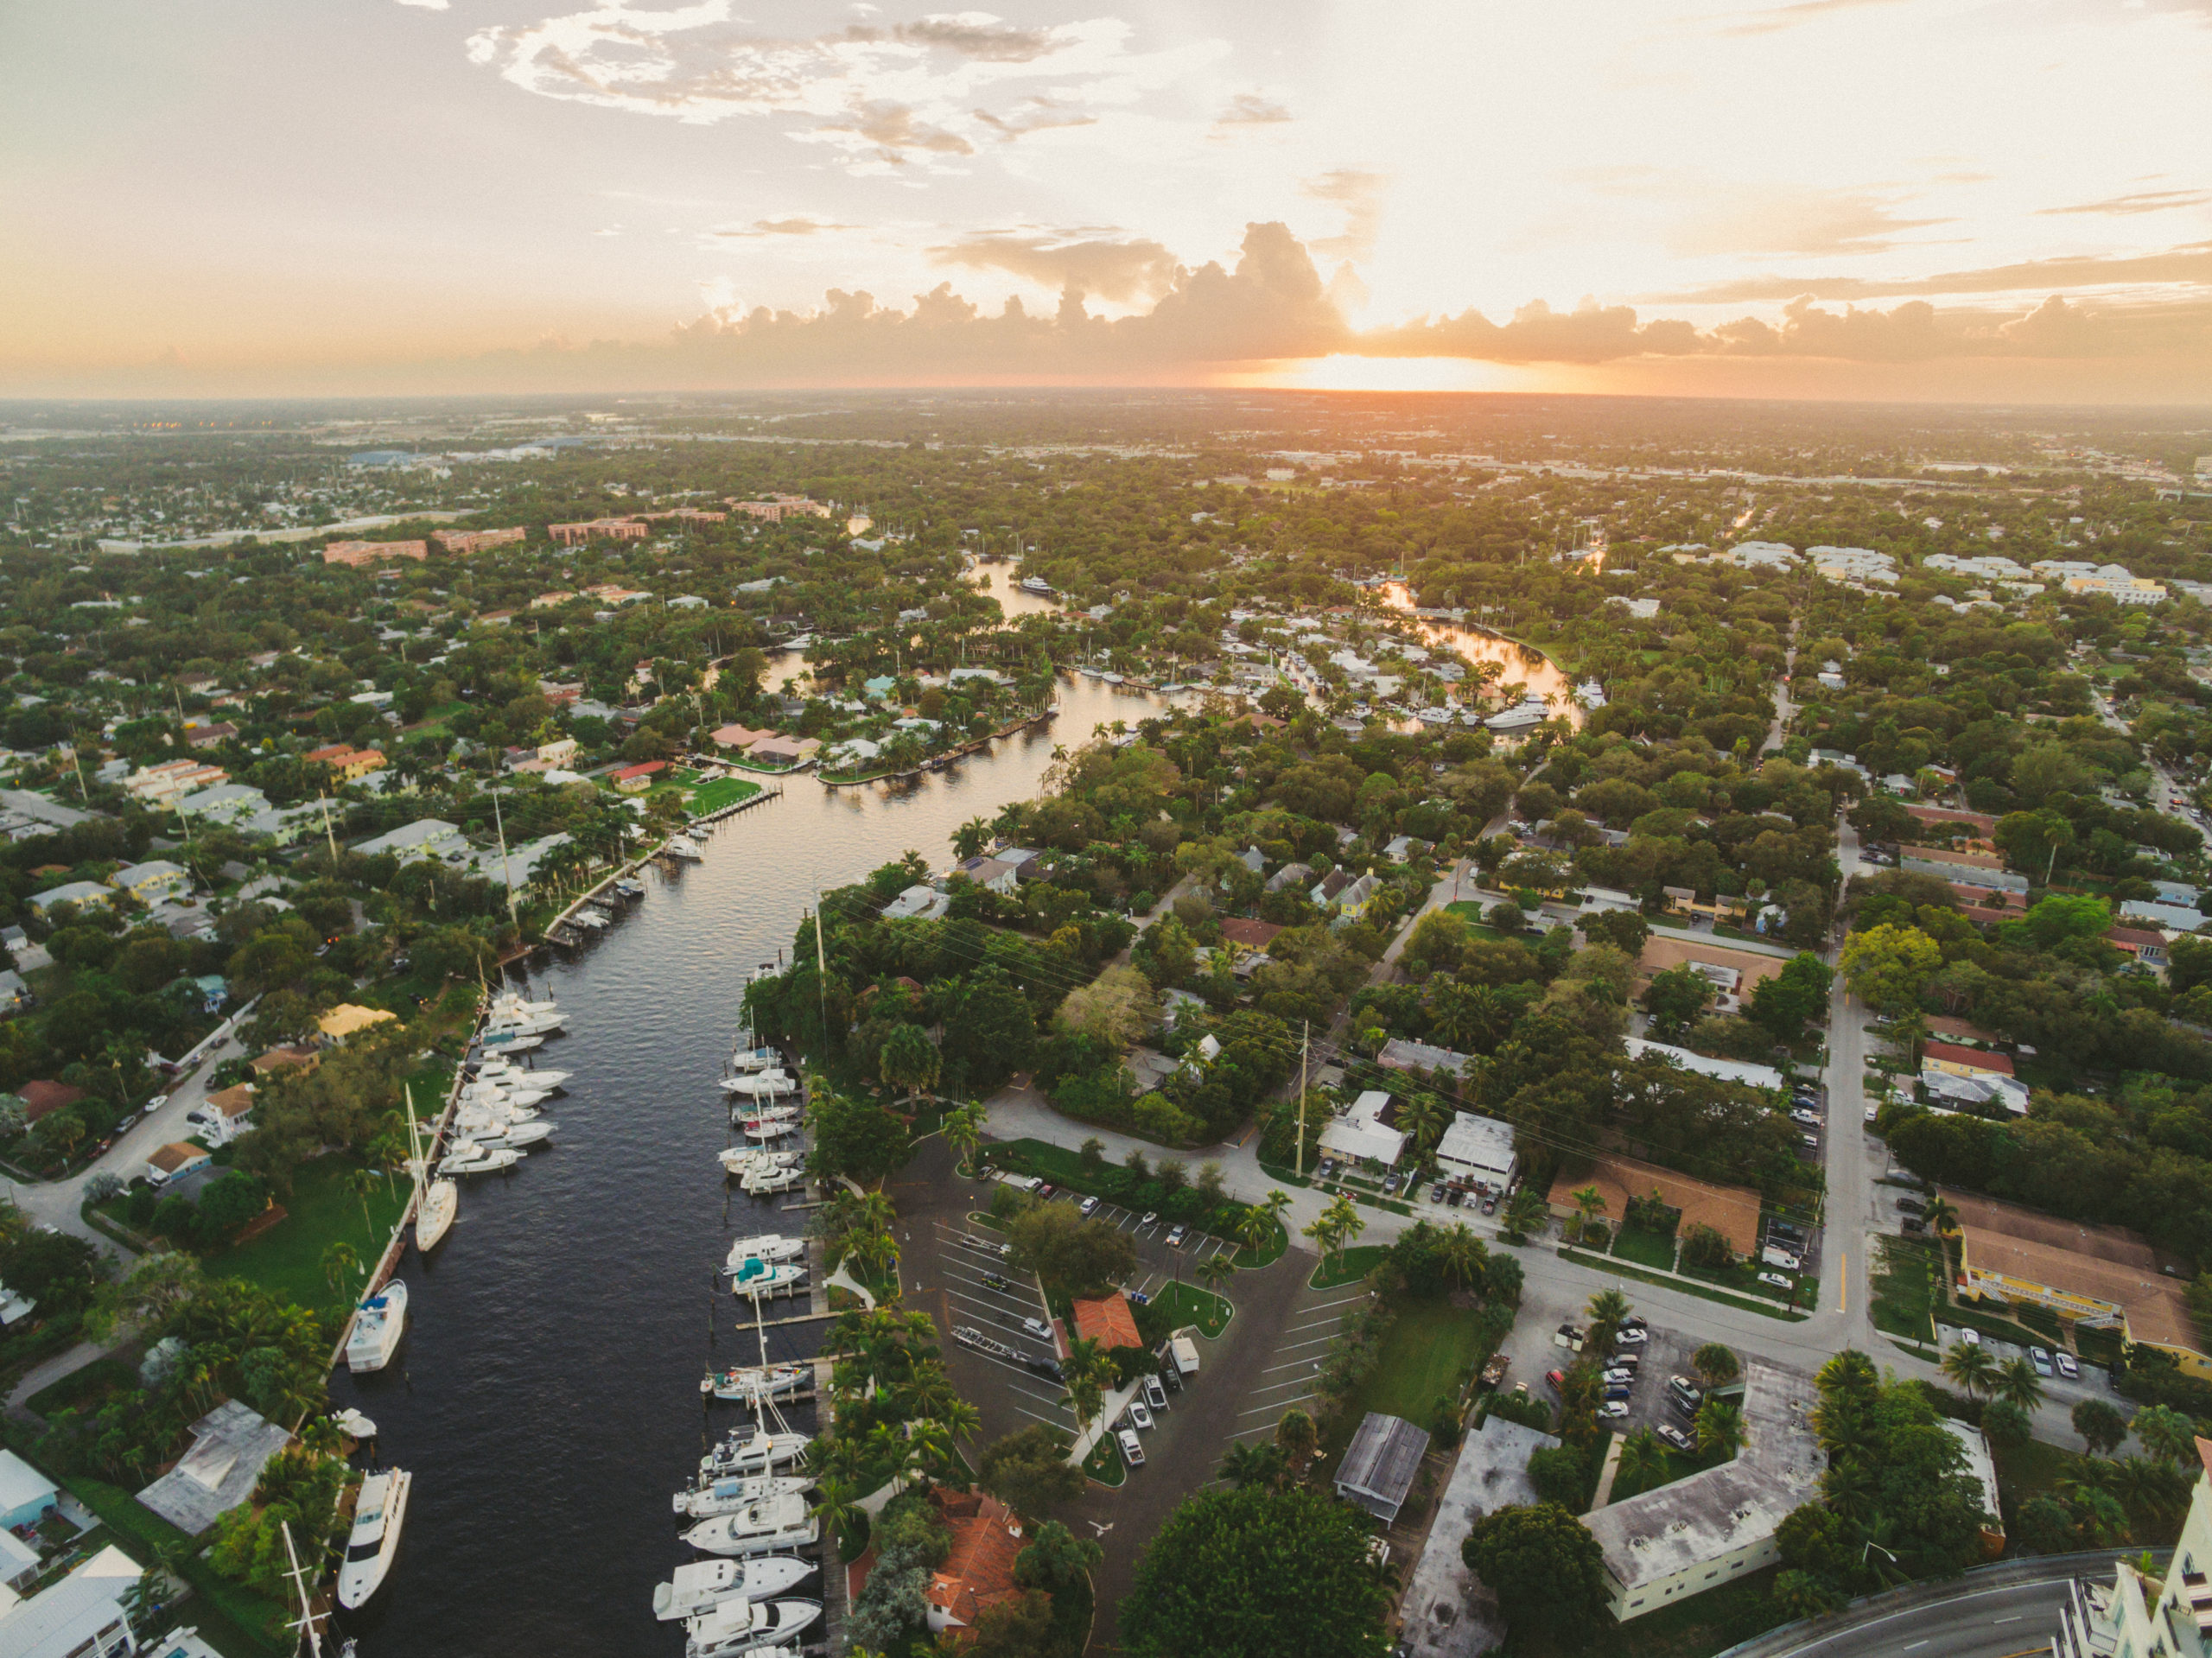 Footage in real estate Aerial view of canal with boats in a neighborhood